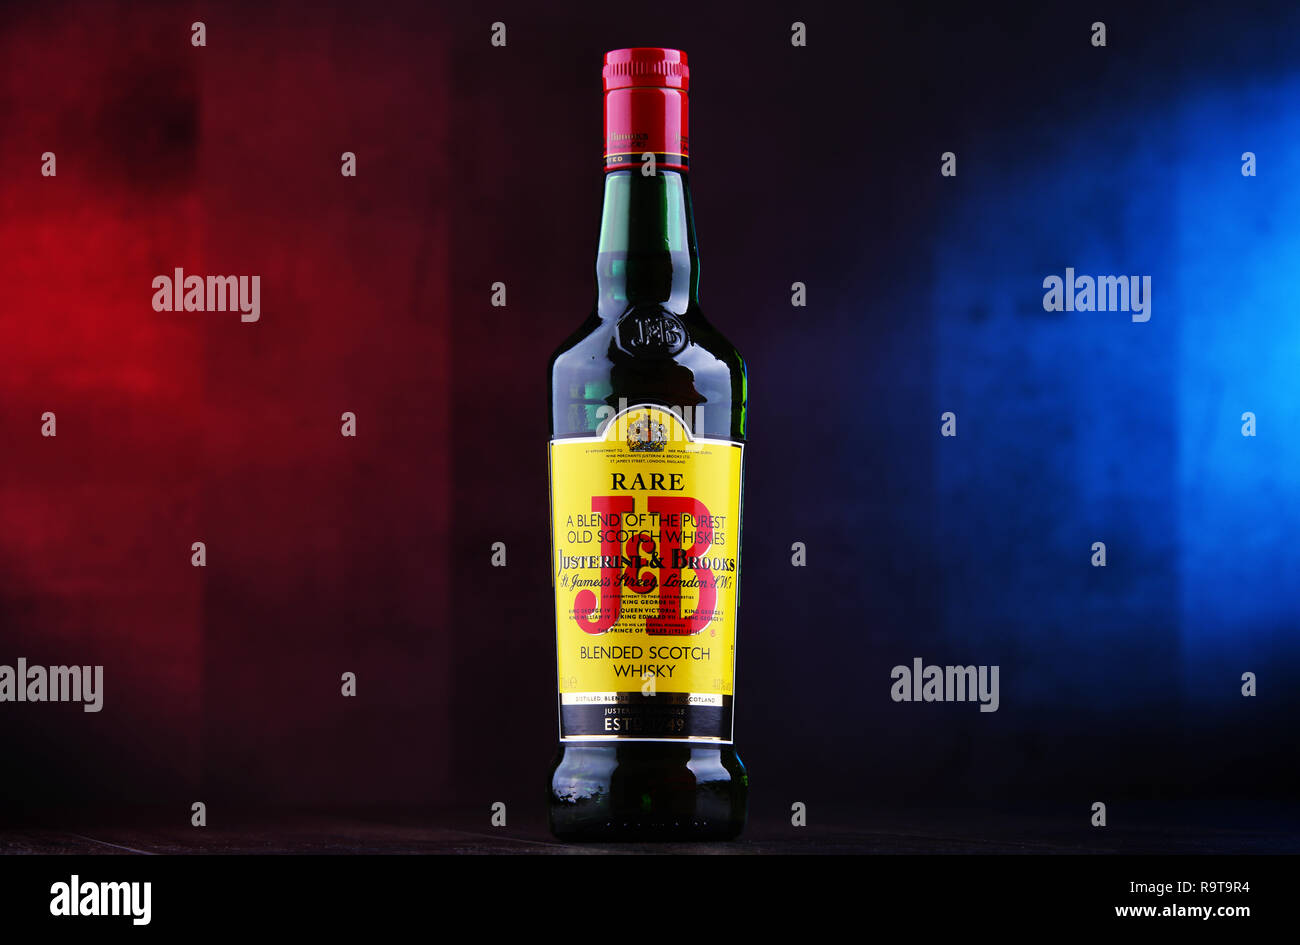 POZNAN, POL - DEC 12, 2018: Bottle of J&B Rare blended Scotch whisky, a product of Justerini & Brooks Ltd. fine wine and spirits merchant who have bee Stock Photo